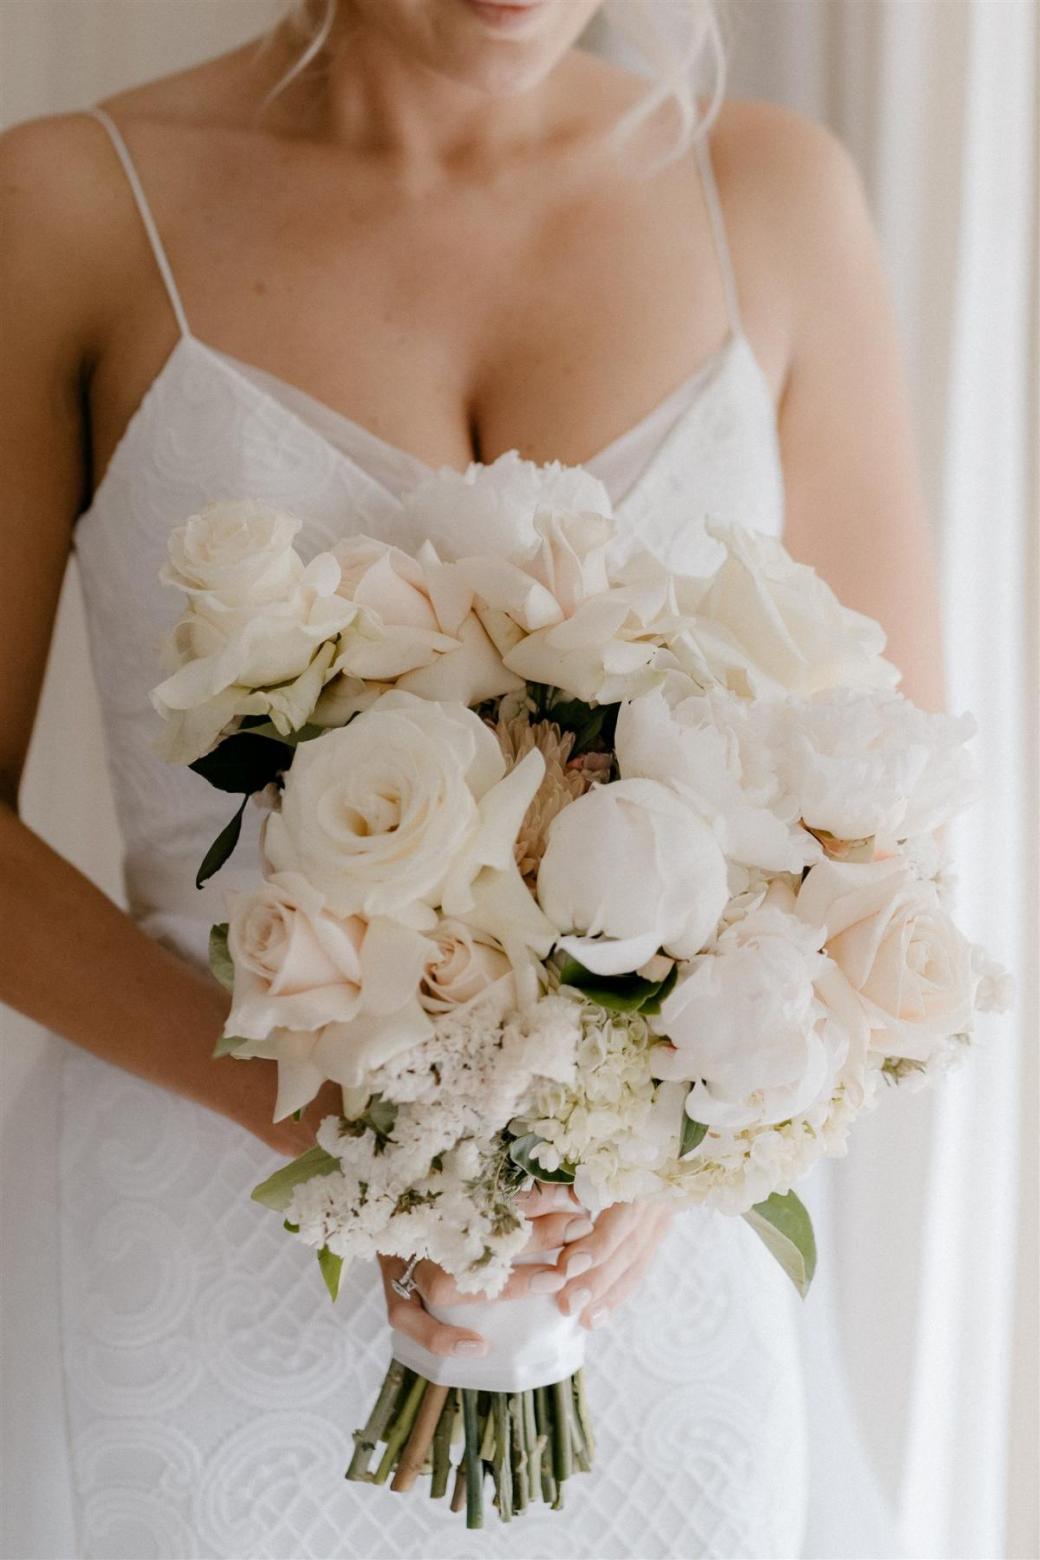 KWH bride Ashleigh's natural paletted bridal bouquet, featuring white and blush roses.